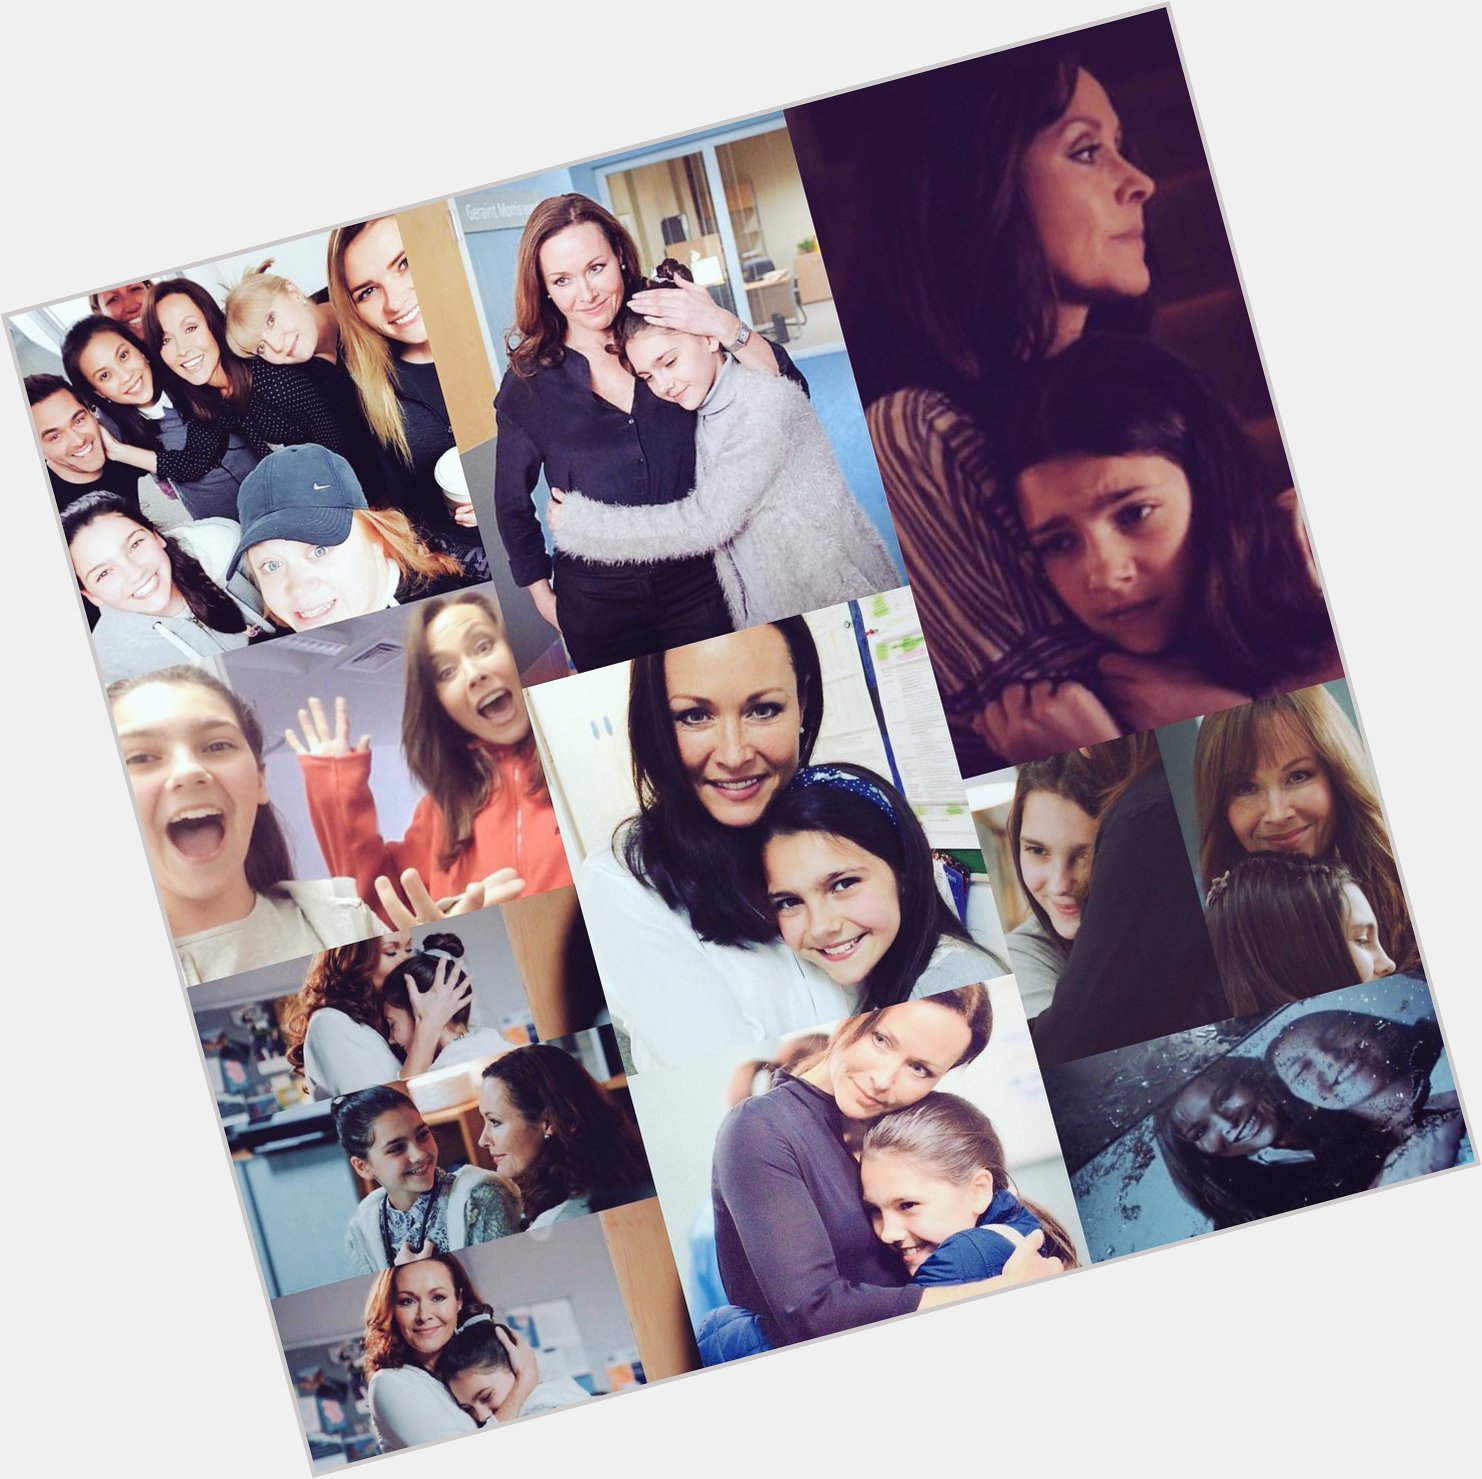 Happy Birthday to the amazing Amanda Mealing! By far the best onscreen mother & daughter 